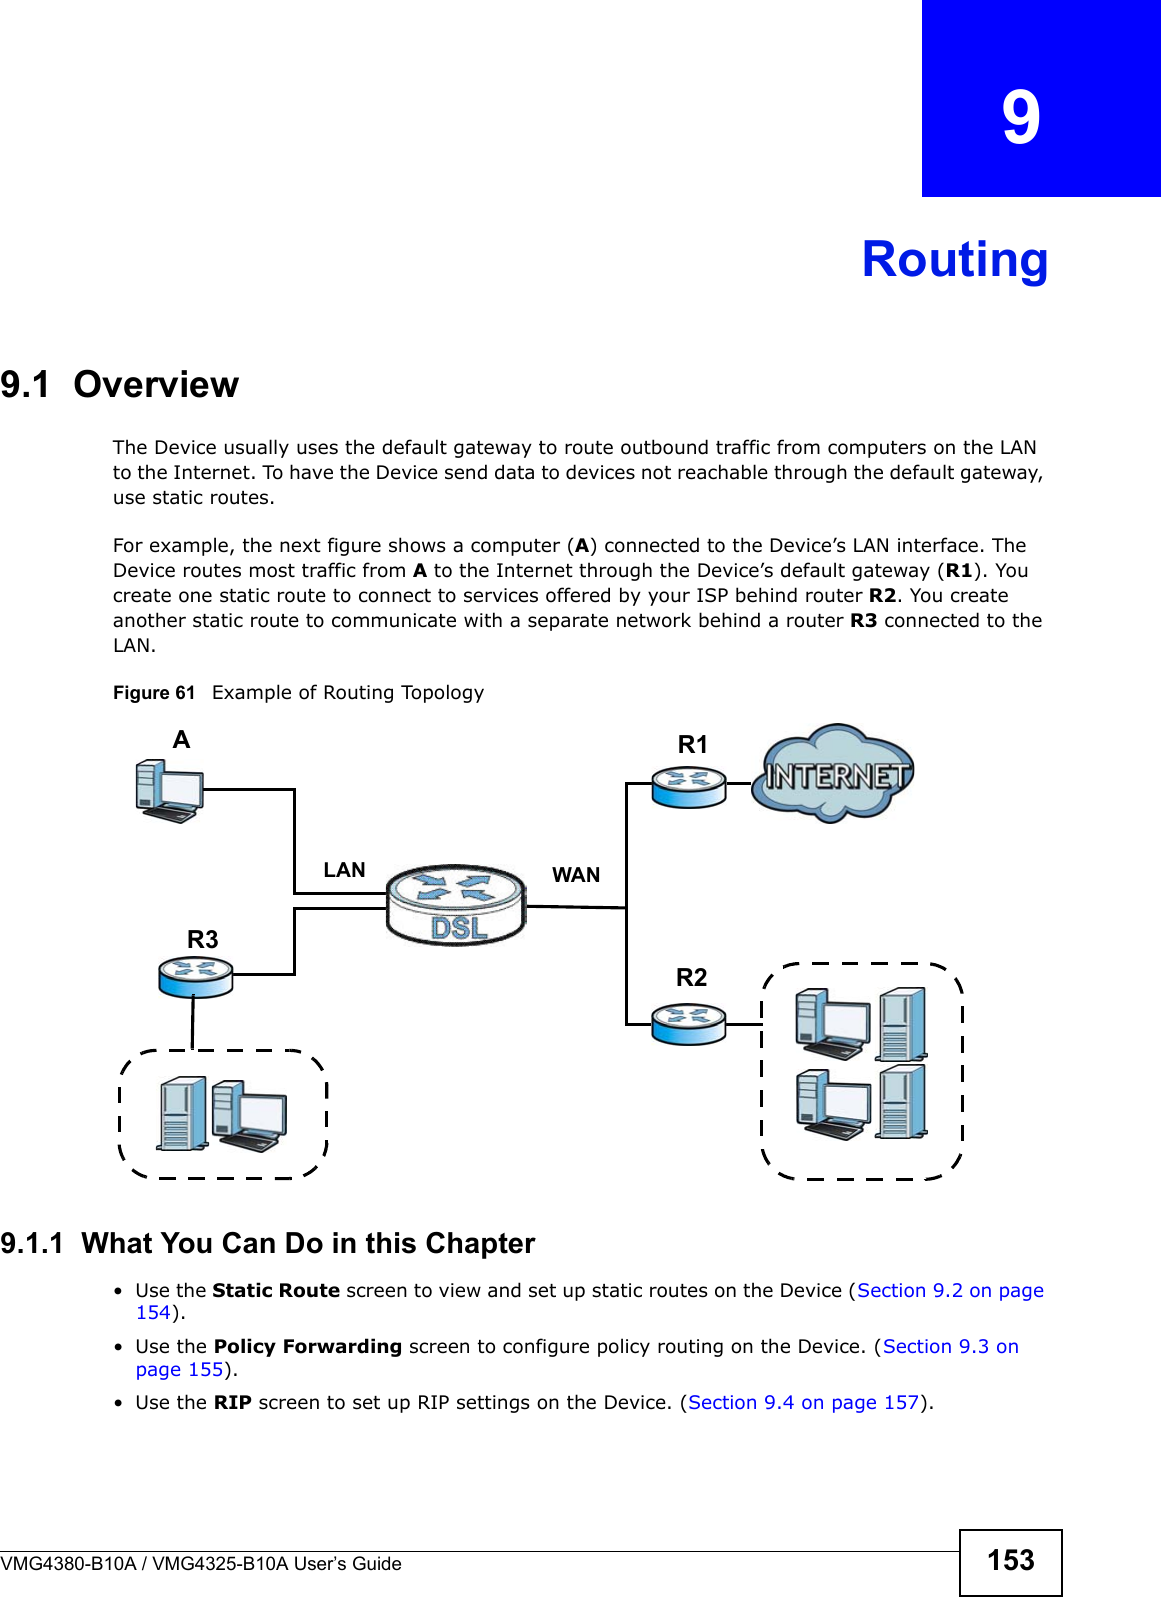 VMG4380-B10A / VMG4325-B10A User’s Guide 153CHAPTER  9Routing9.1  Overview The Device usually uses the default gateway to route outbound traffic from computers on the LAN to the Internet. To have the Device send data to devices not reachable through the default gateway,use static routes.For example, the next figure shows a computer (A) connected to the Device’s LAN interface. The Device routes most traffic from A to the Internet through the Device’s default gateway (R1). You create one static route to connect to services offered by your ISP behind router R2. You createanother static route to communicate with a separate network behind a router R3 connected to the LAN.   Figure 61   Example of Routing Topology9.1.1  What You Can Do in this Chapter• Use the Static Route screen to view and set up static routes on the Device (Section 9.2 on page154).• Use the Policy Forwarding screen to configure policy routing on the Device. (Section 9.3 on page 155). • Use the RIP screen to set up RIP settings on the Device. (Section 9.4 on page 157).WANR1R2AR3LAN